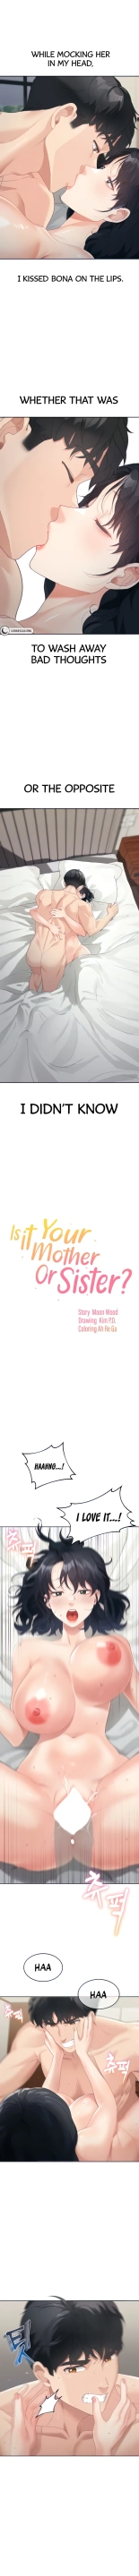 Is It Your Mother or Sister? : página 55